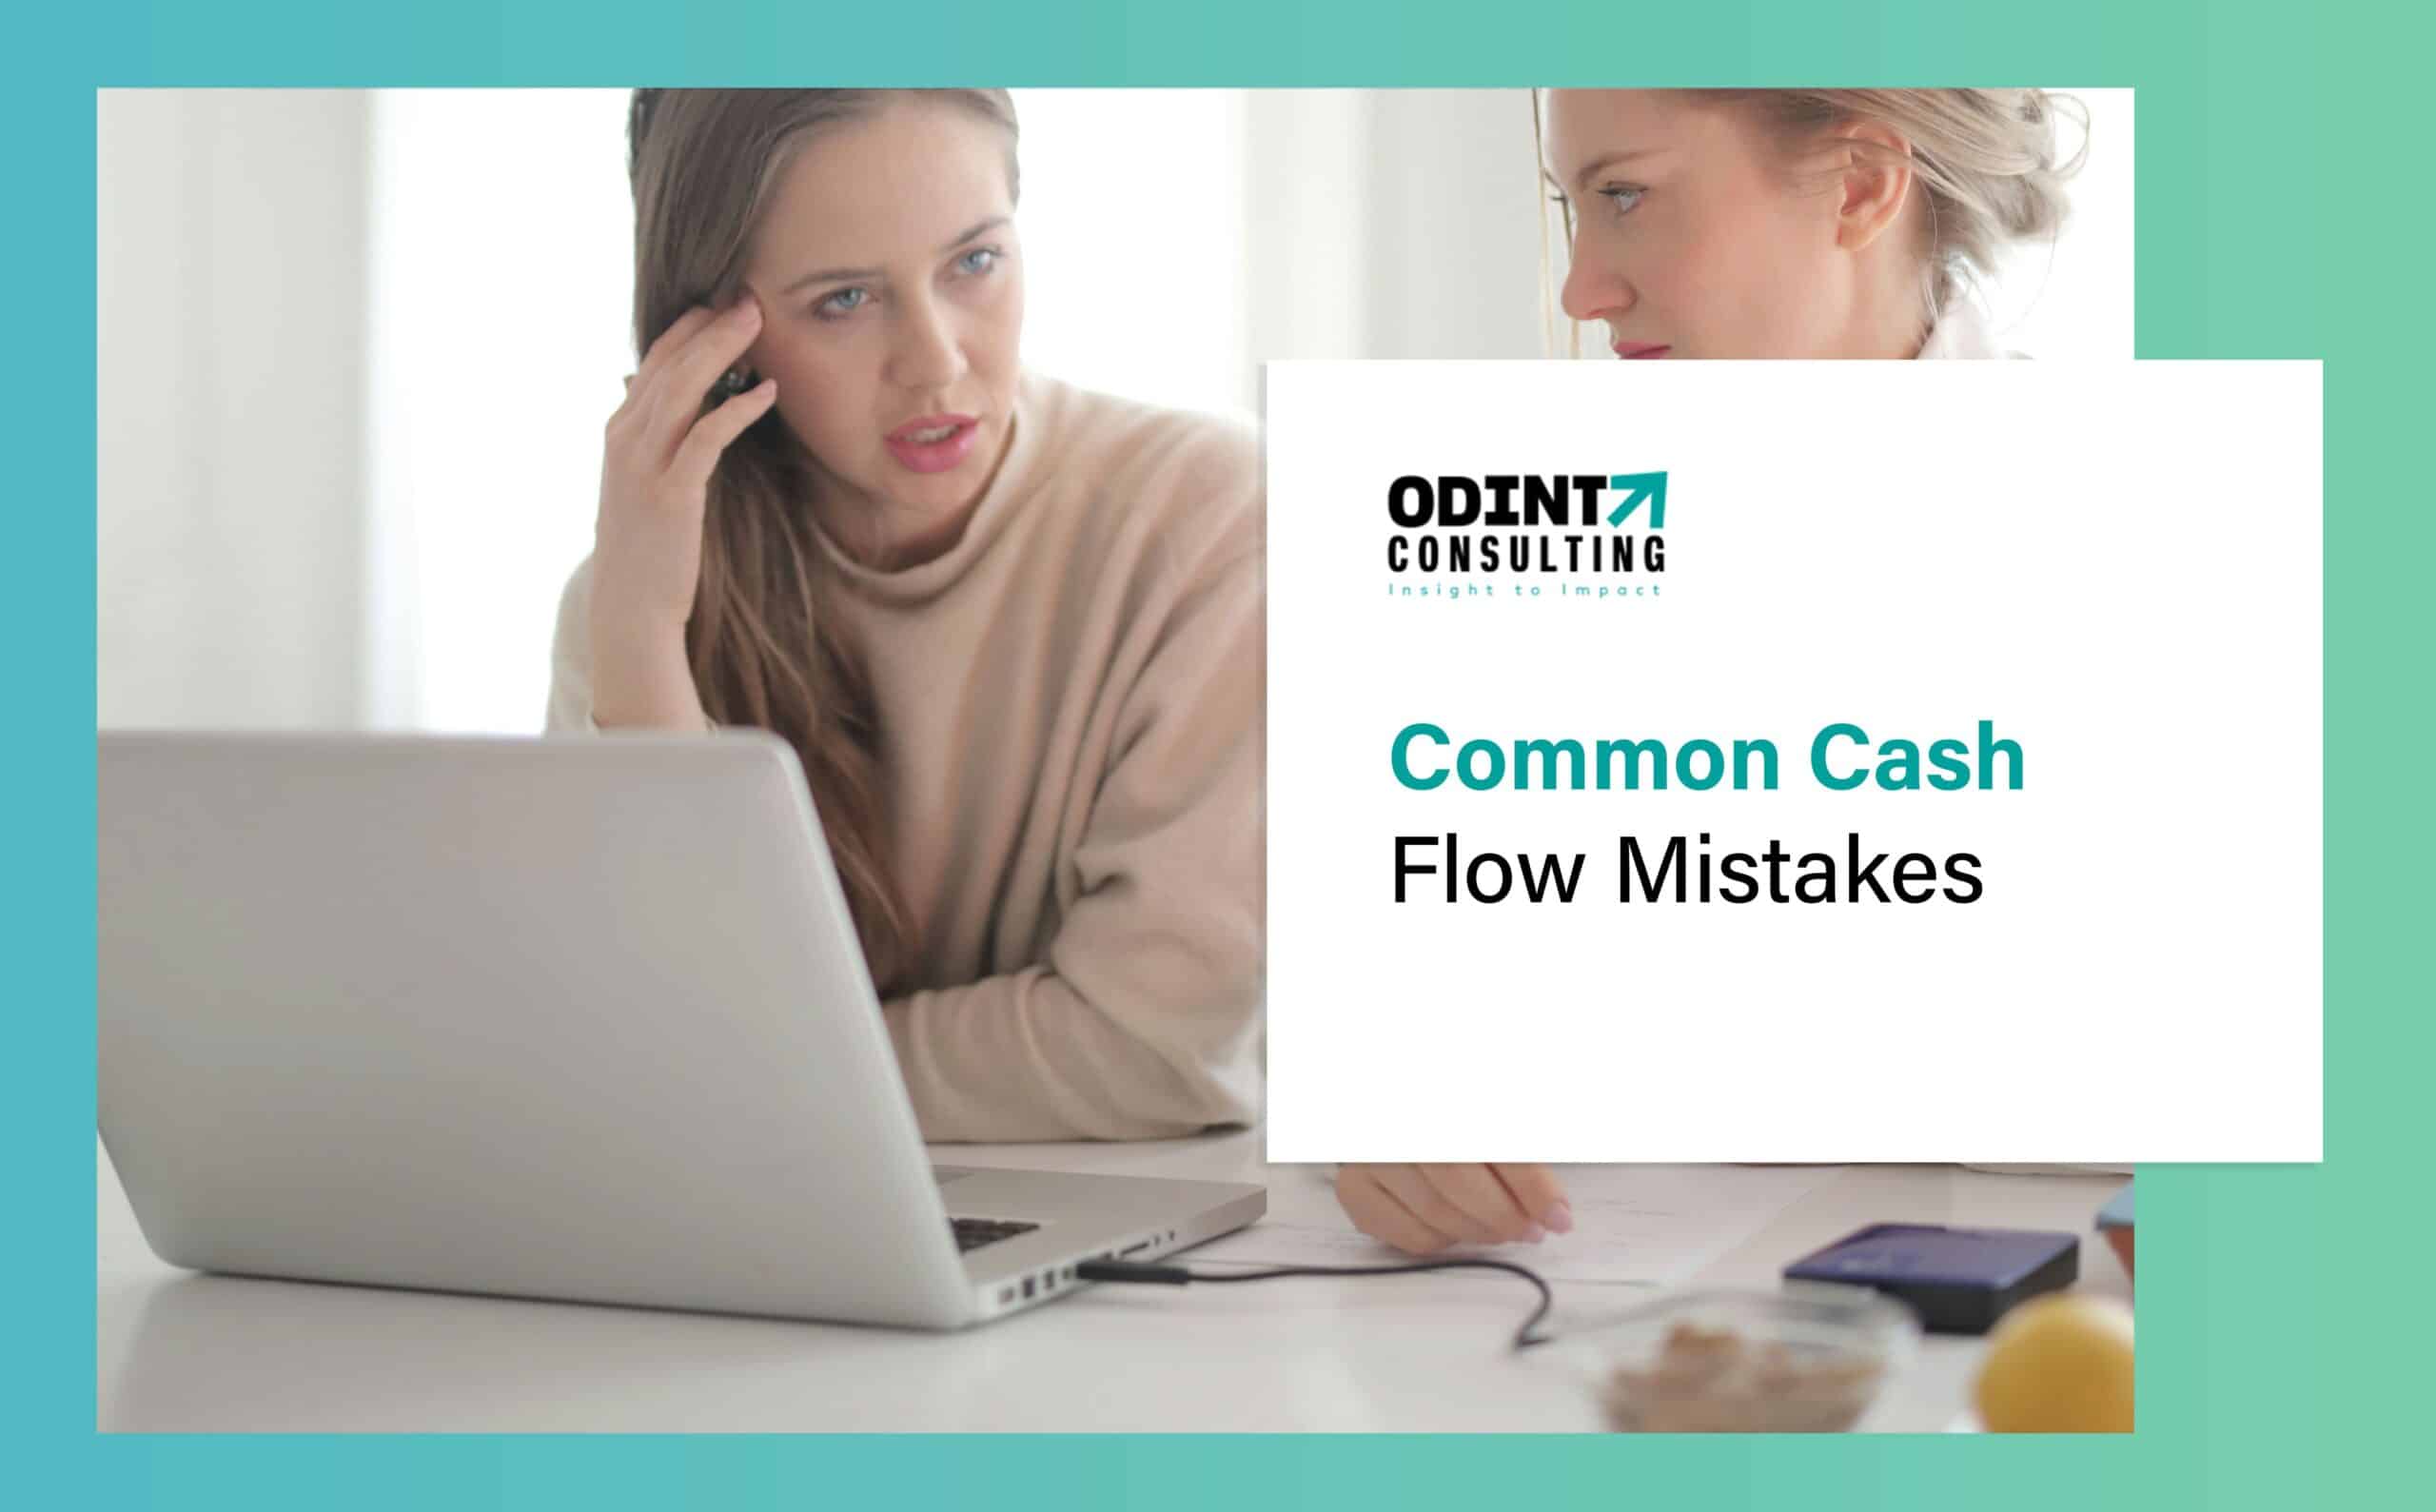 Common Cash Flow Mistakes in 2022: Billings, Payments & Credit